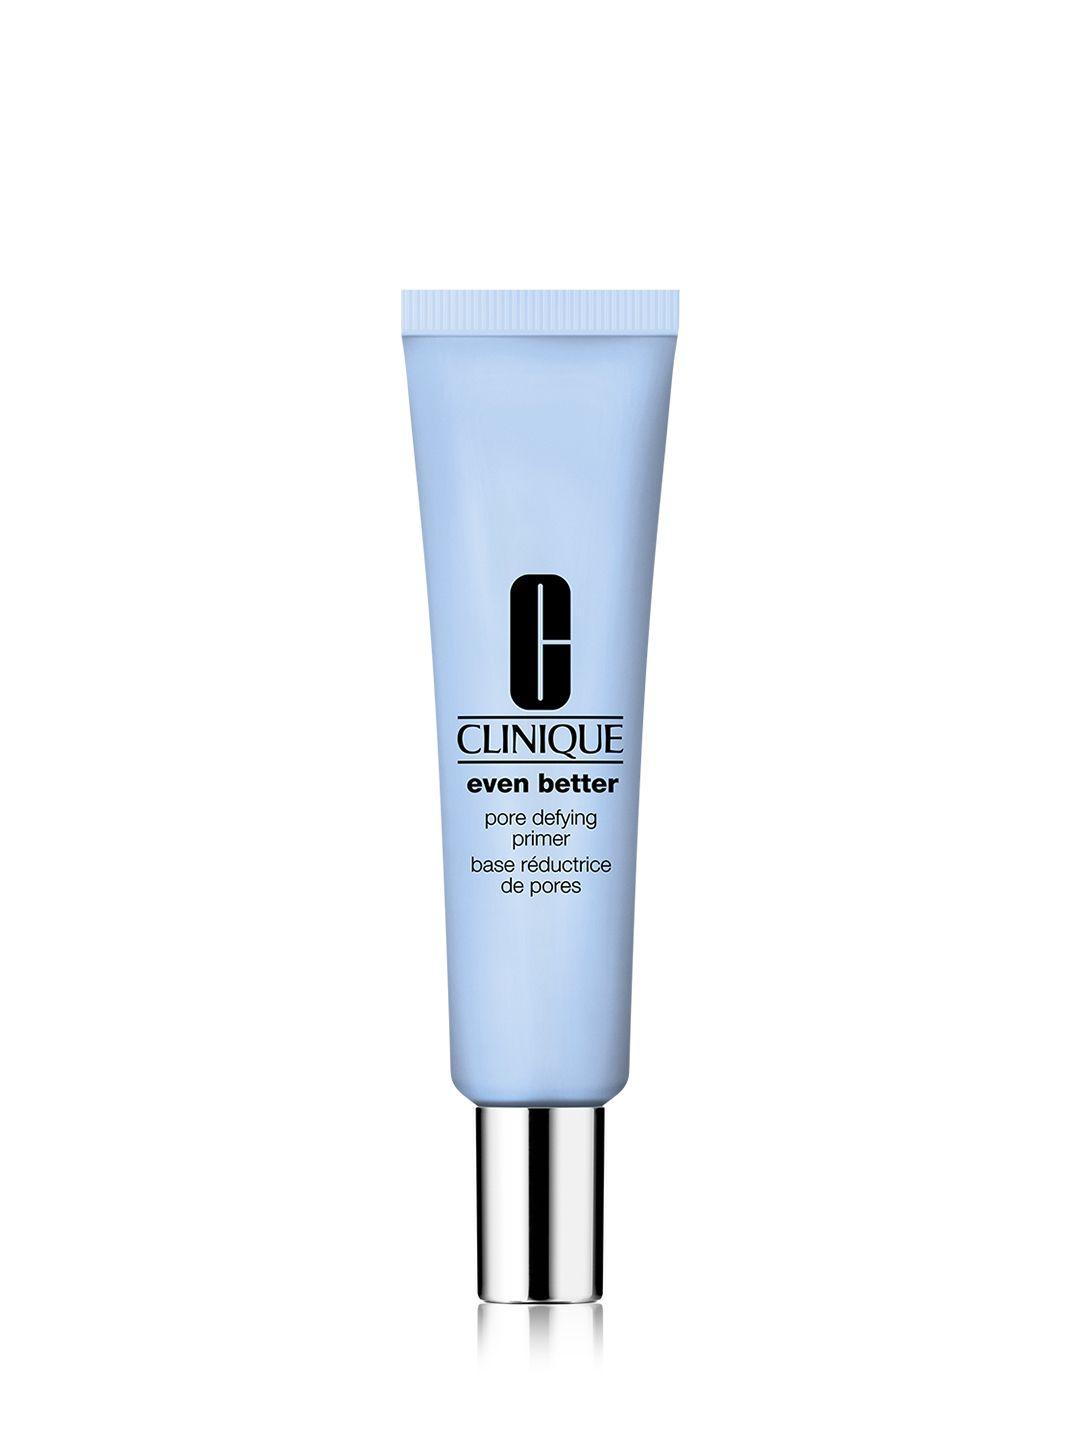 clinique even better pore defying primer with niacinamide & hyaluronic acid - 30ml